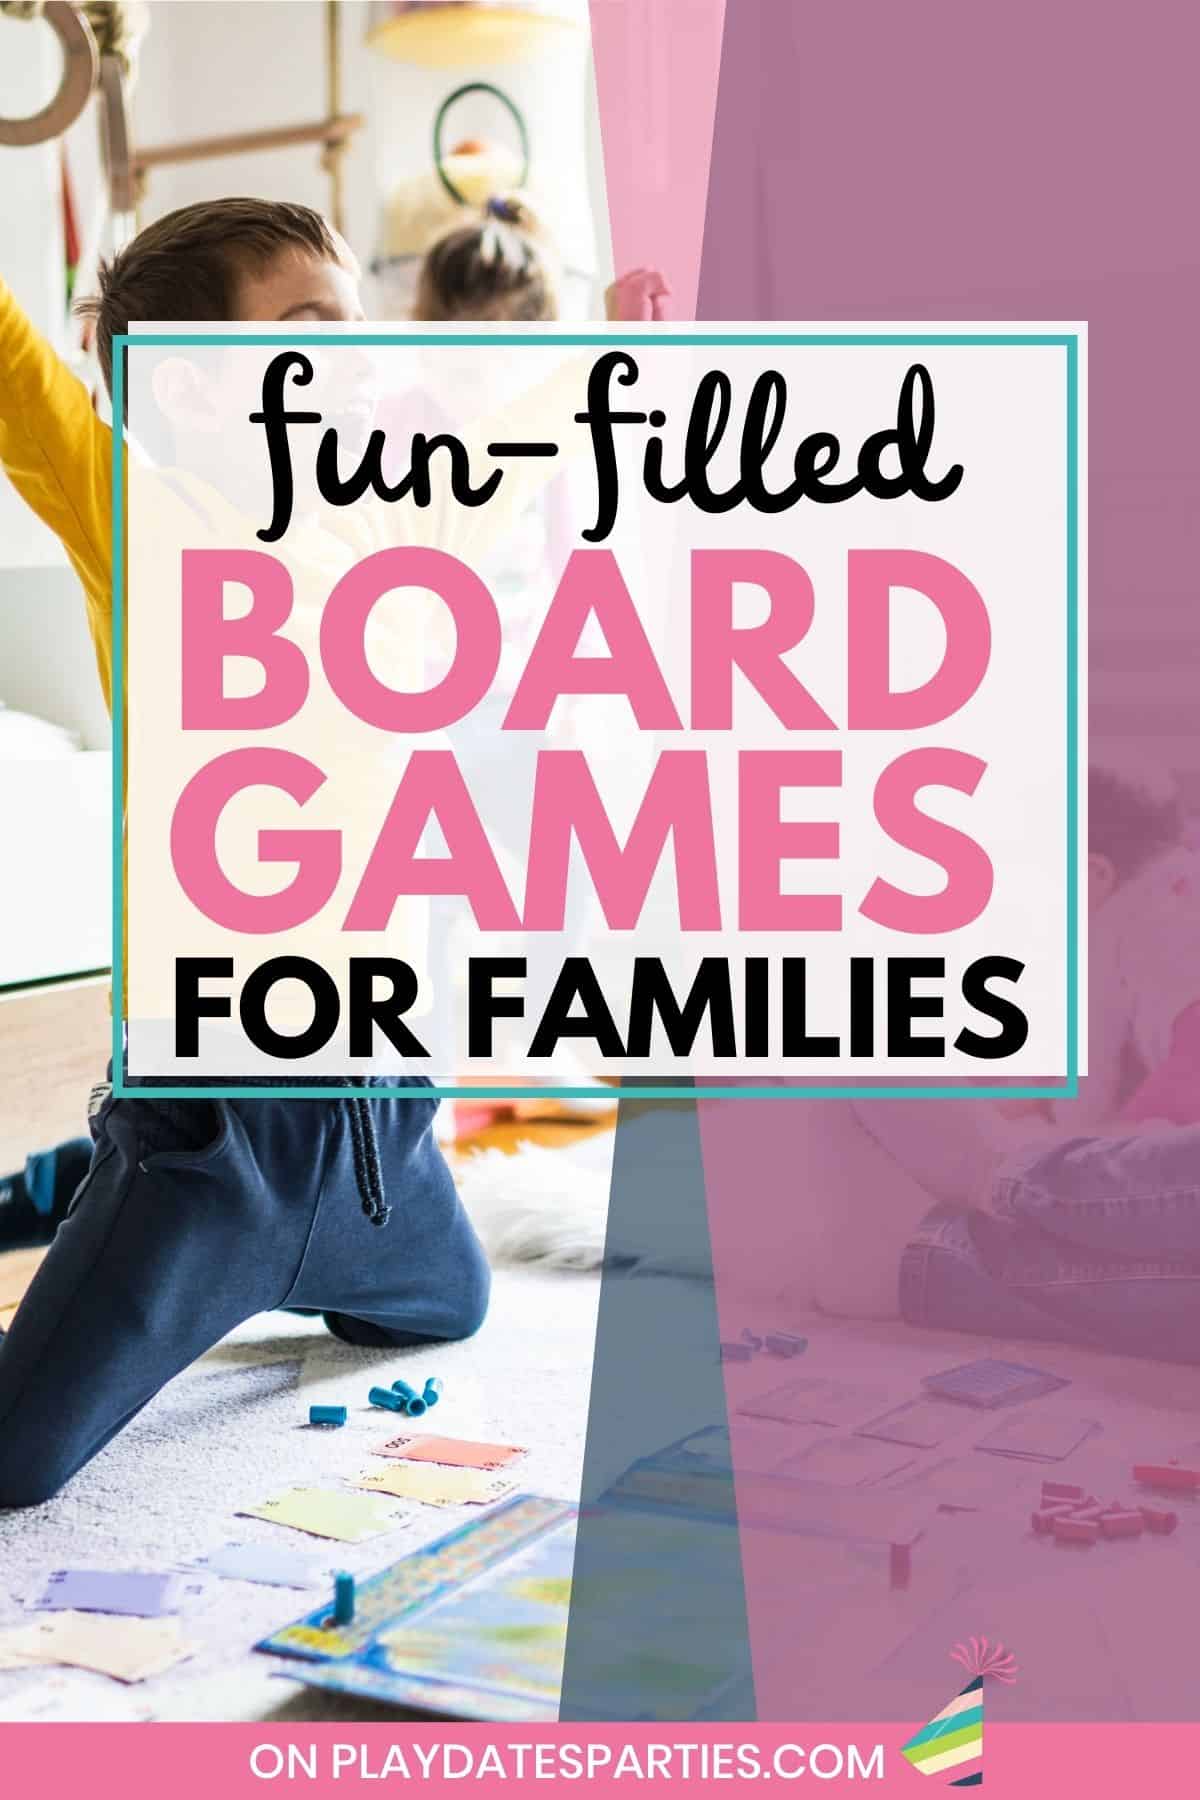 A gleeful child celebrating a win in a family game with text overlay fun filled board games for families.